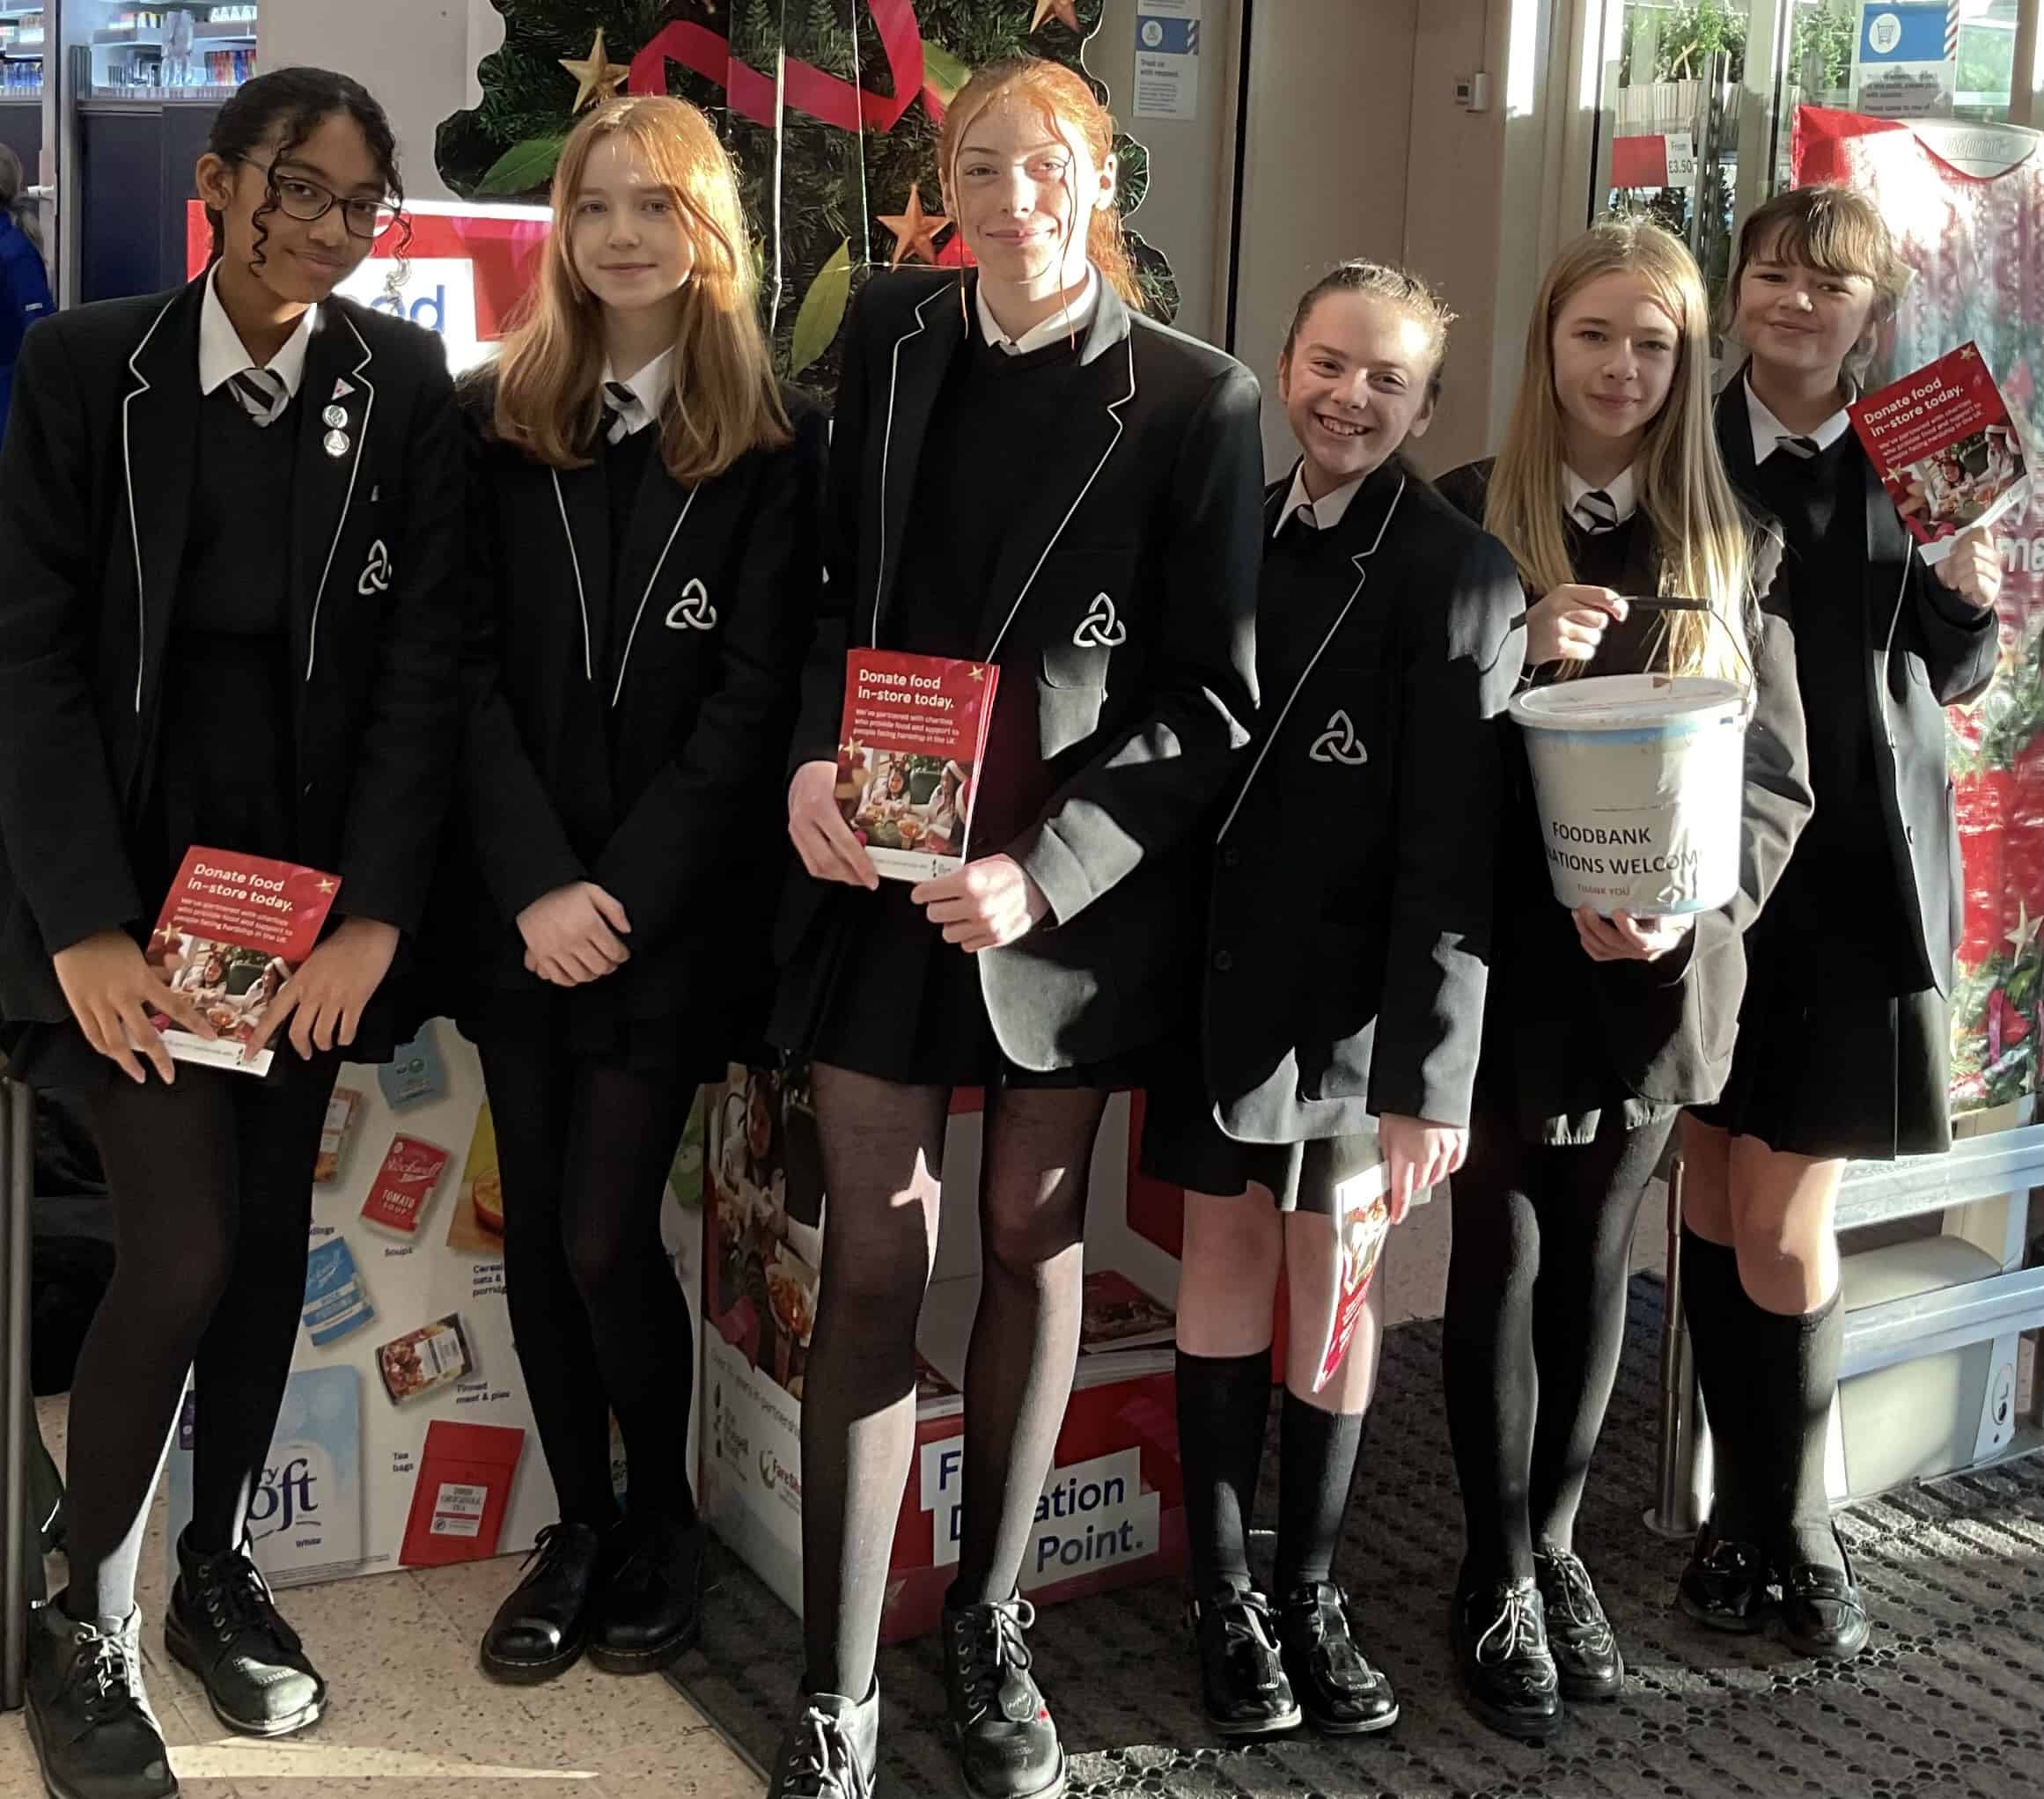 Laurus Ryecroft students stand in Tesco during their fundraising.